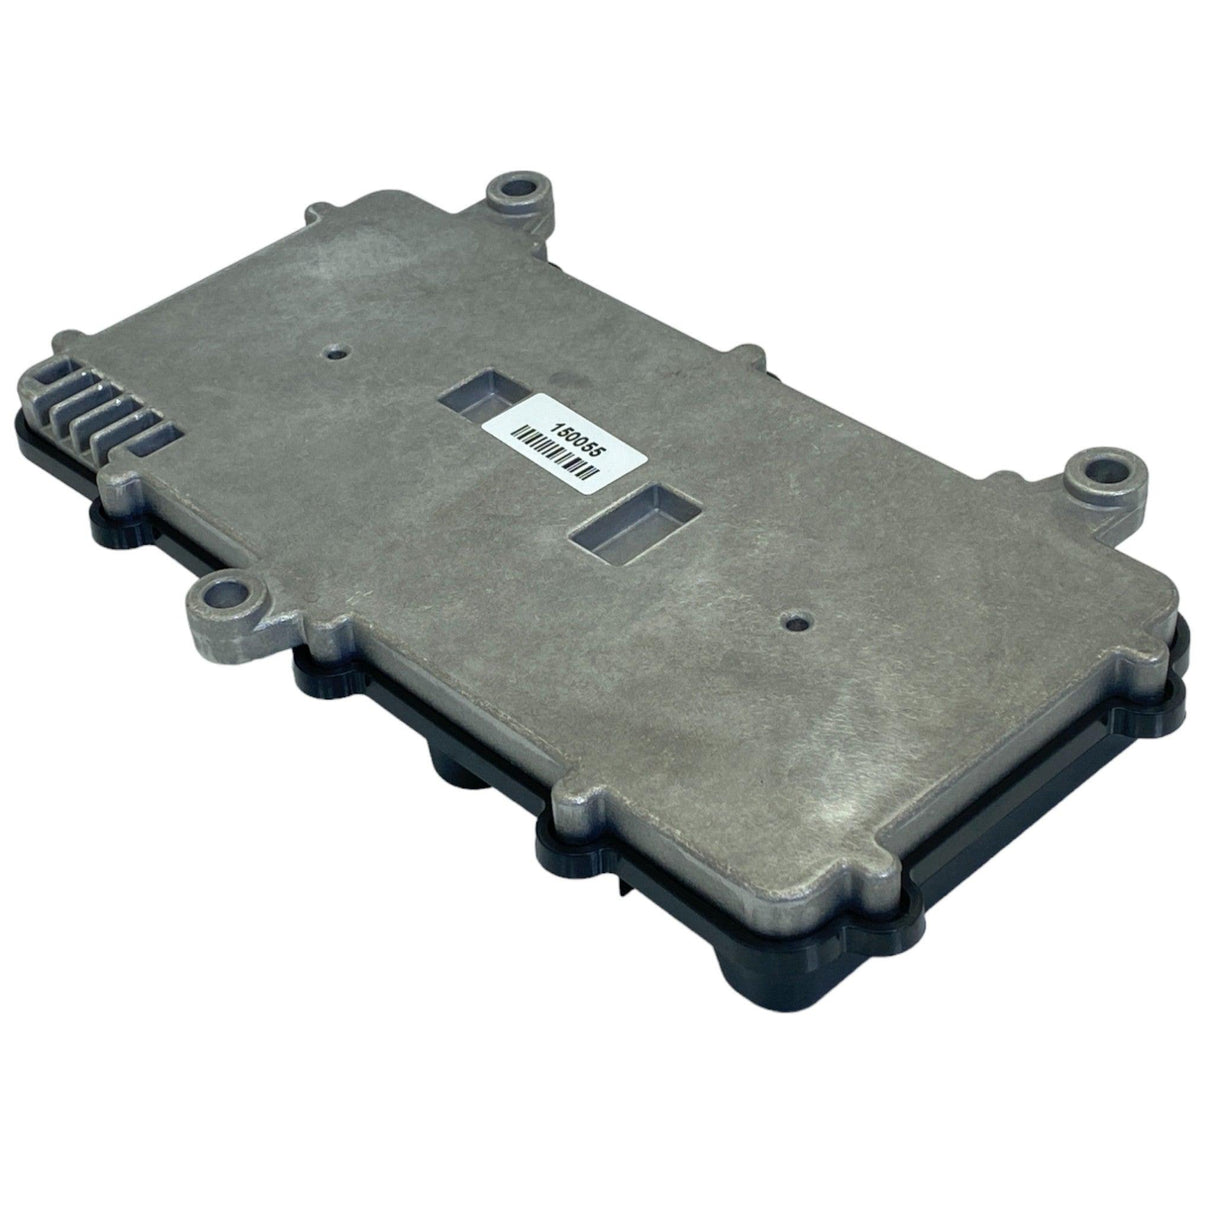 A66-19809-000 Freightliner® Chm Bcm Module For M2 Business Class.